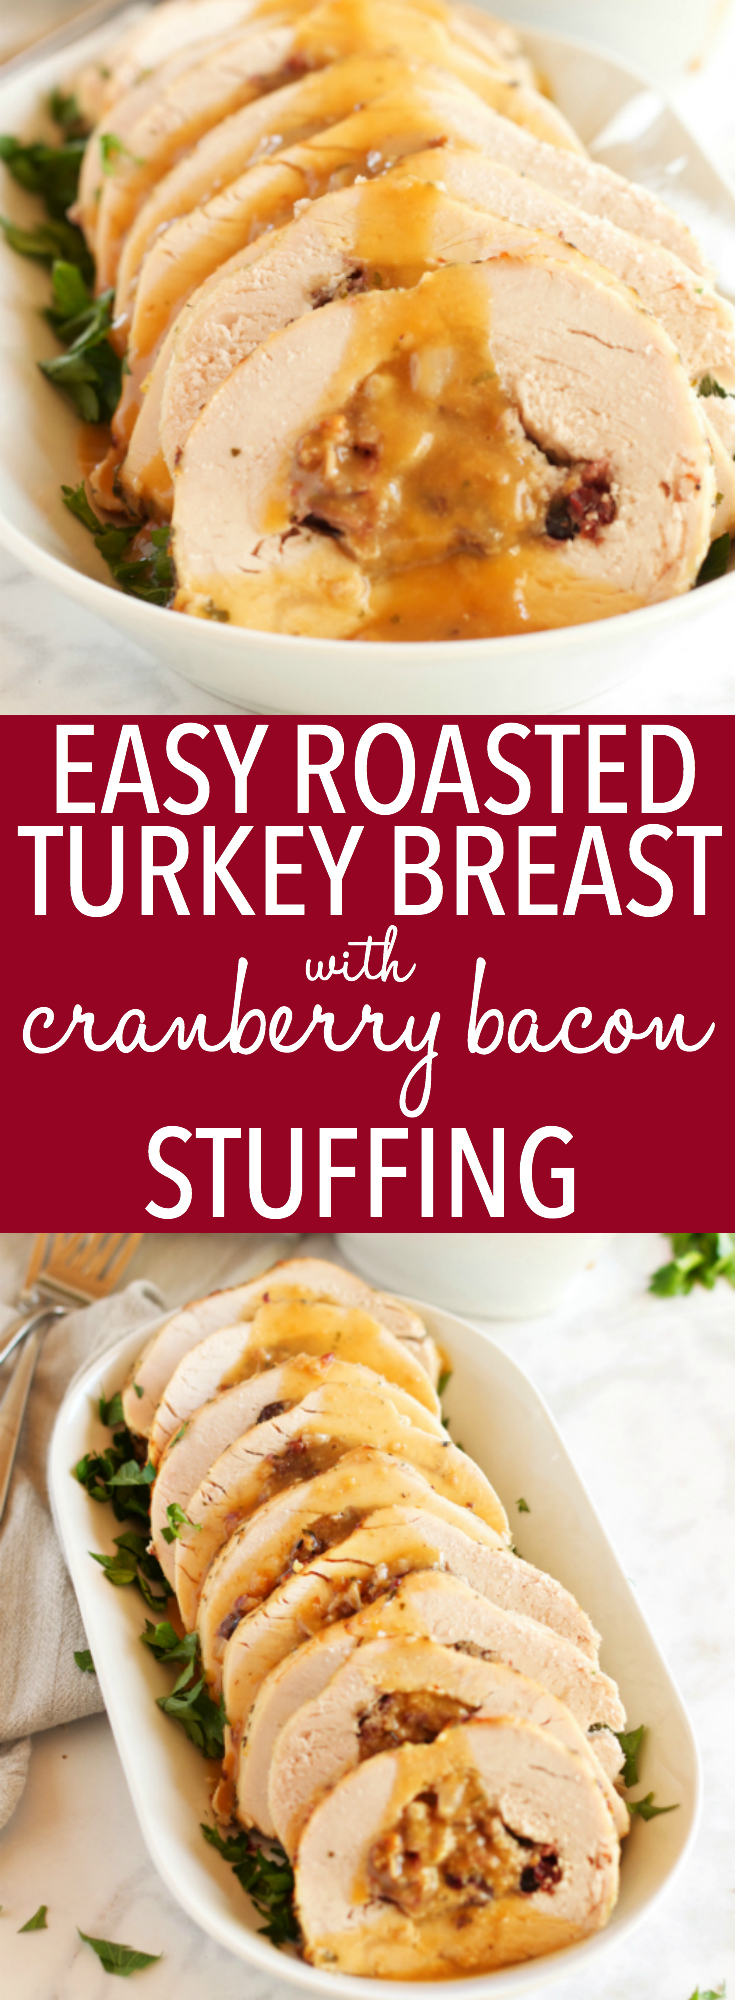 This Roasted Turkey Breast with Cranberry Bacon Stuffing is an easy holiday recipe! Juicy turkey and easy homemade stuffing with cranberries, bacon & herbs! Perfect for Thanksgiving or Christmas for a small holiday dinner crowd! Recipe from thebusybaker.ca! #christmasturkey #thanksgivingturkey #easythanksgivingrecipe #easyturkeyrecipe via @busybakerblog